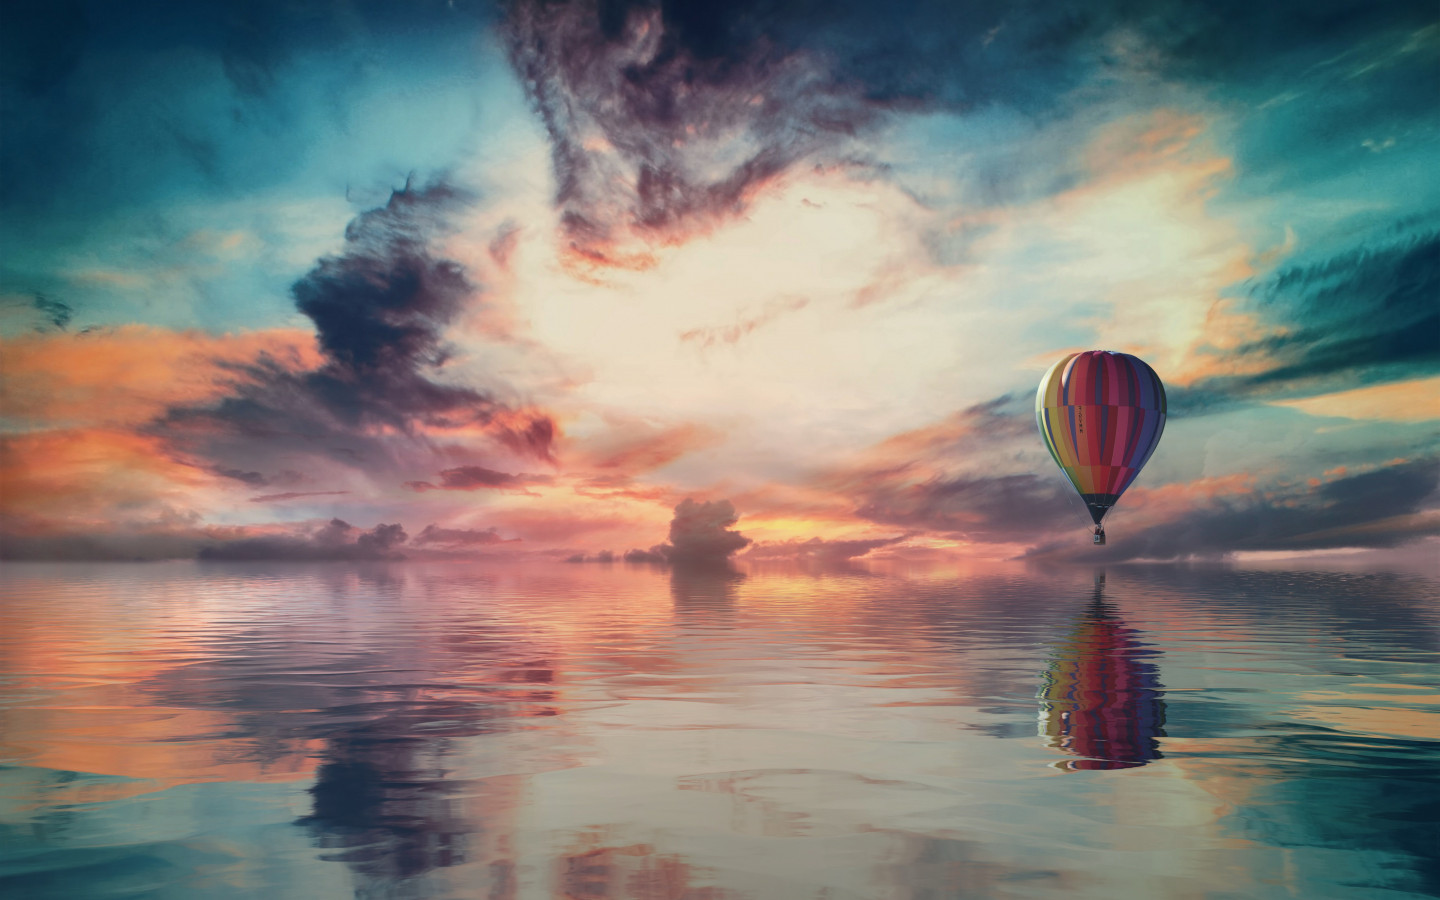 Fantasy travel with the hot air balloon wallpaper 1440x900